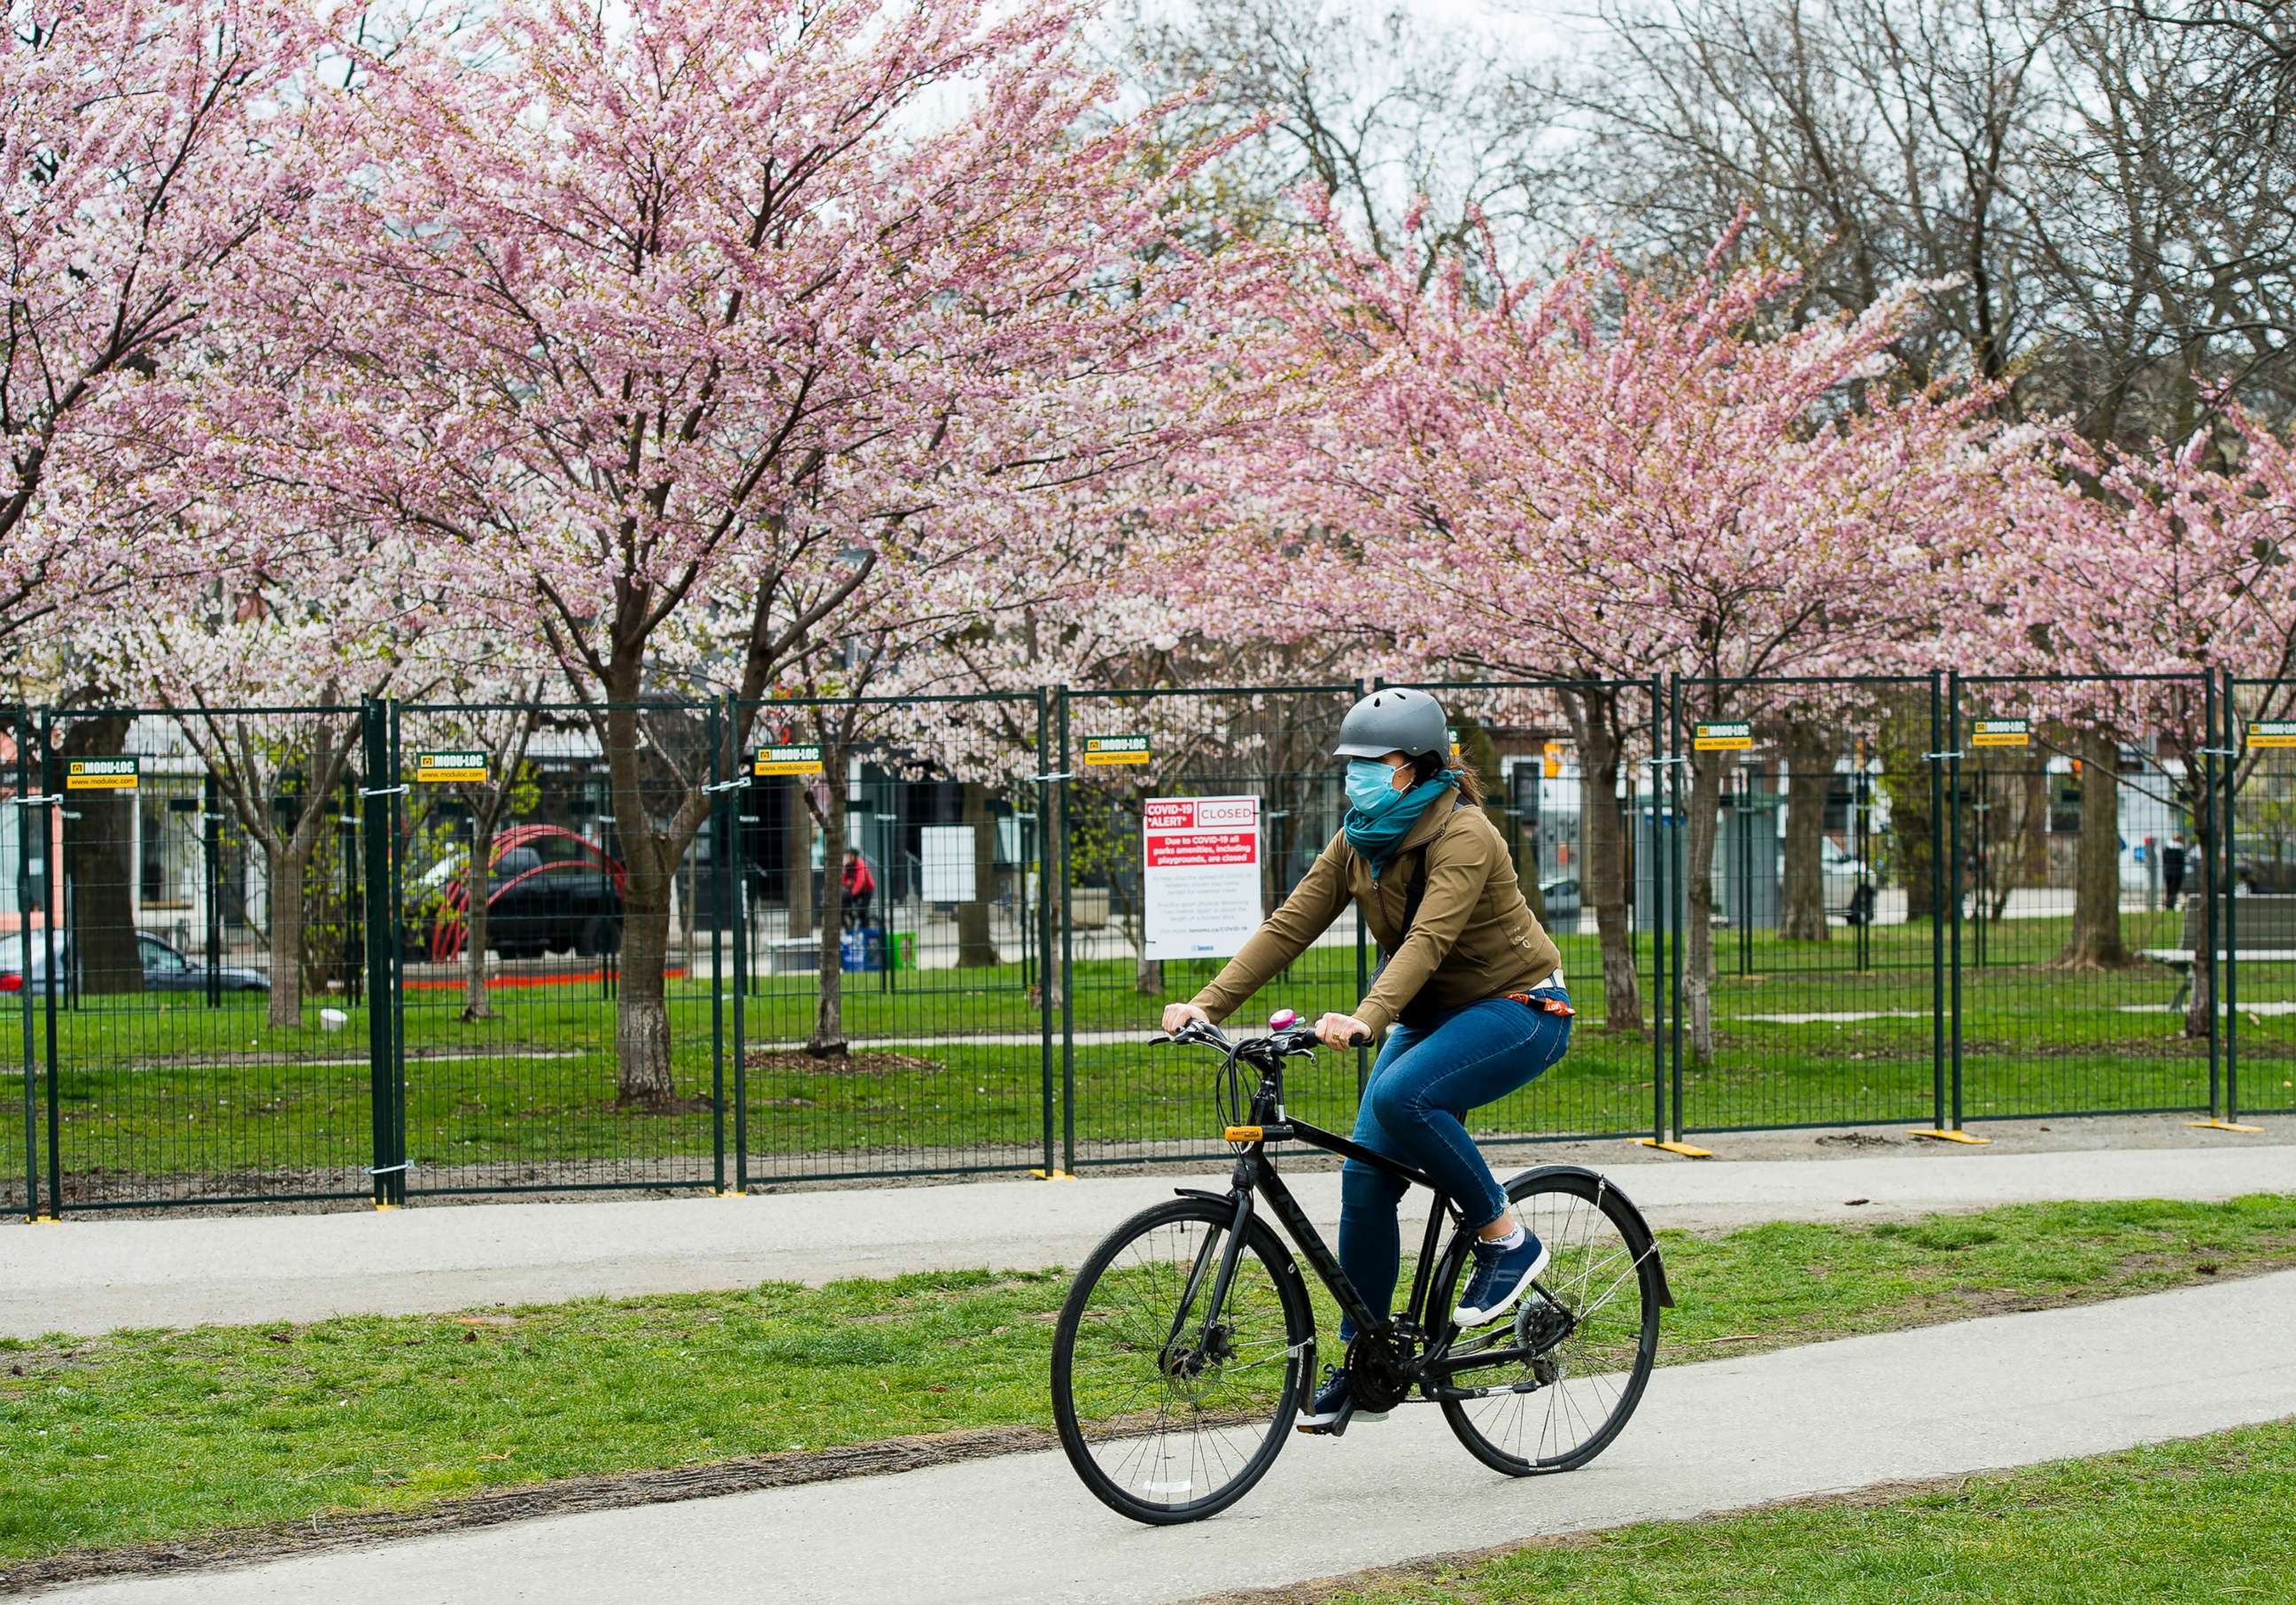 PHOTO: A person rides her bicycle past fenced off cherry blossoms at a park during the COVID-19 pandemic in Toronto, May 1, 2020.